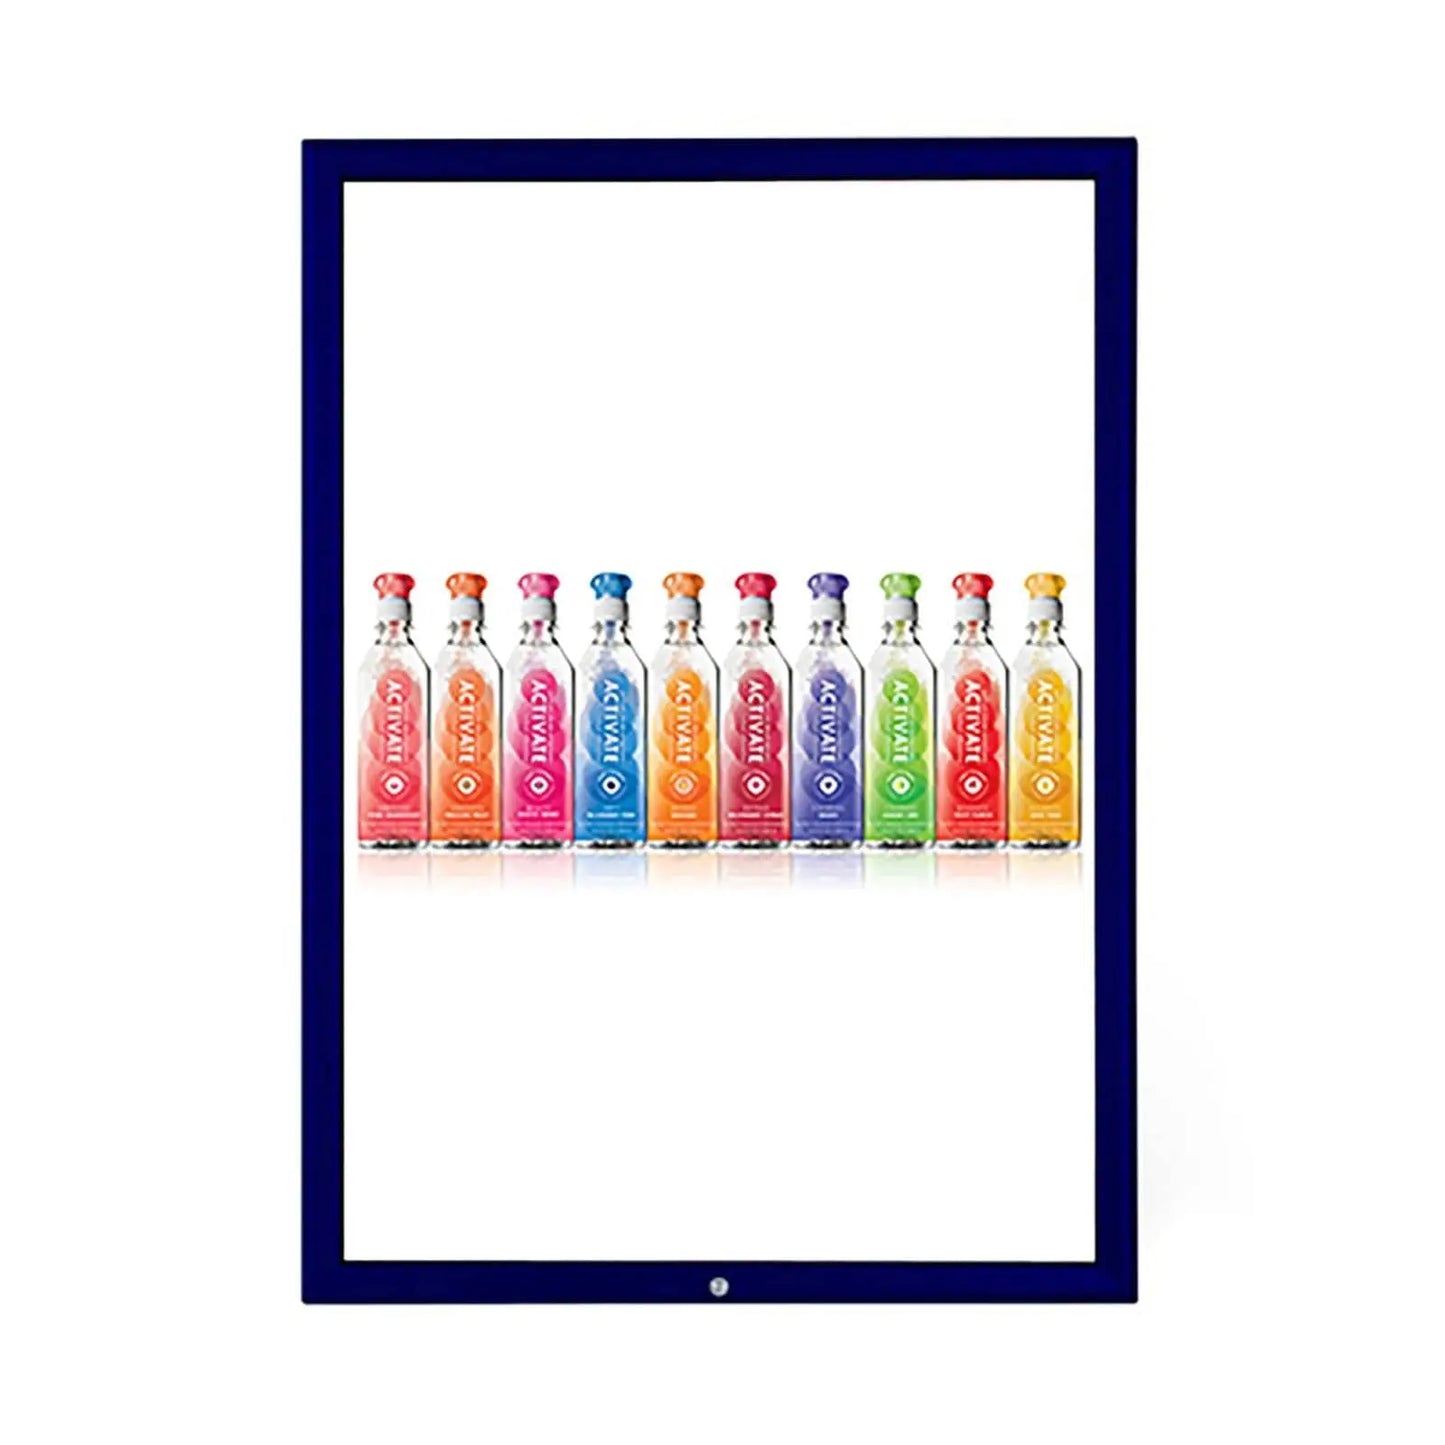 Blue locking snap frame poster size 16X20 - 1.25 inch profile - Snap Frames Direct